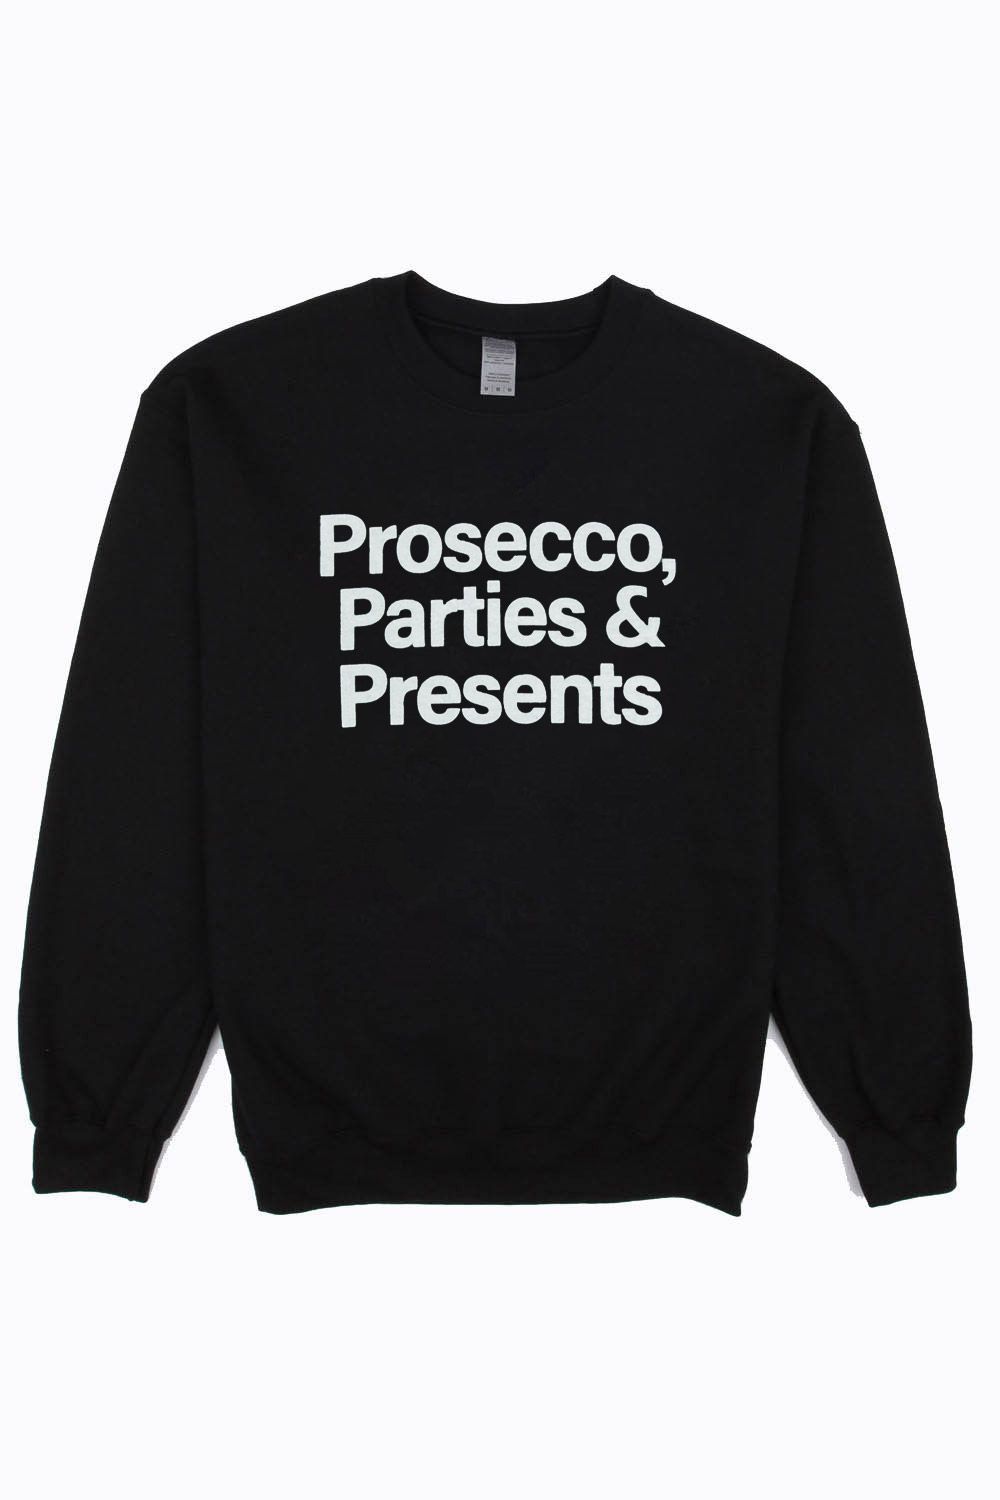 Prosecco, Parties & Presents Christmas Sweatshirt (Pack of 6)